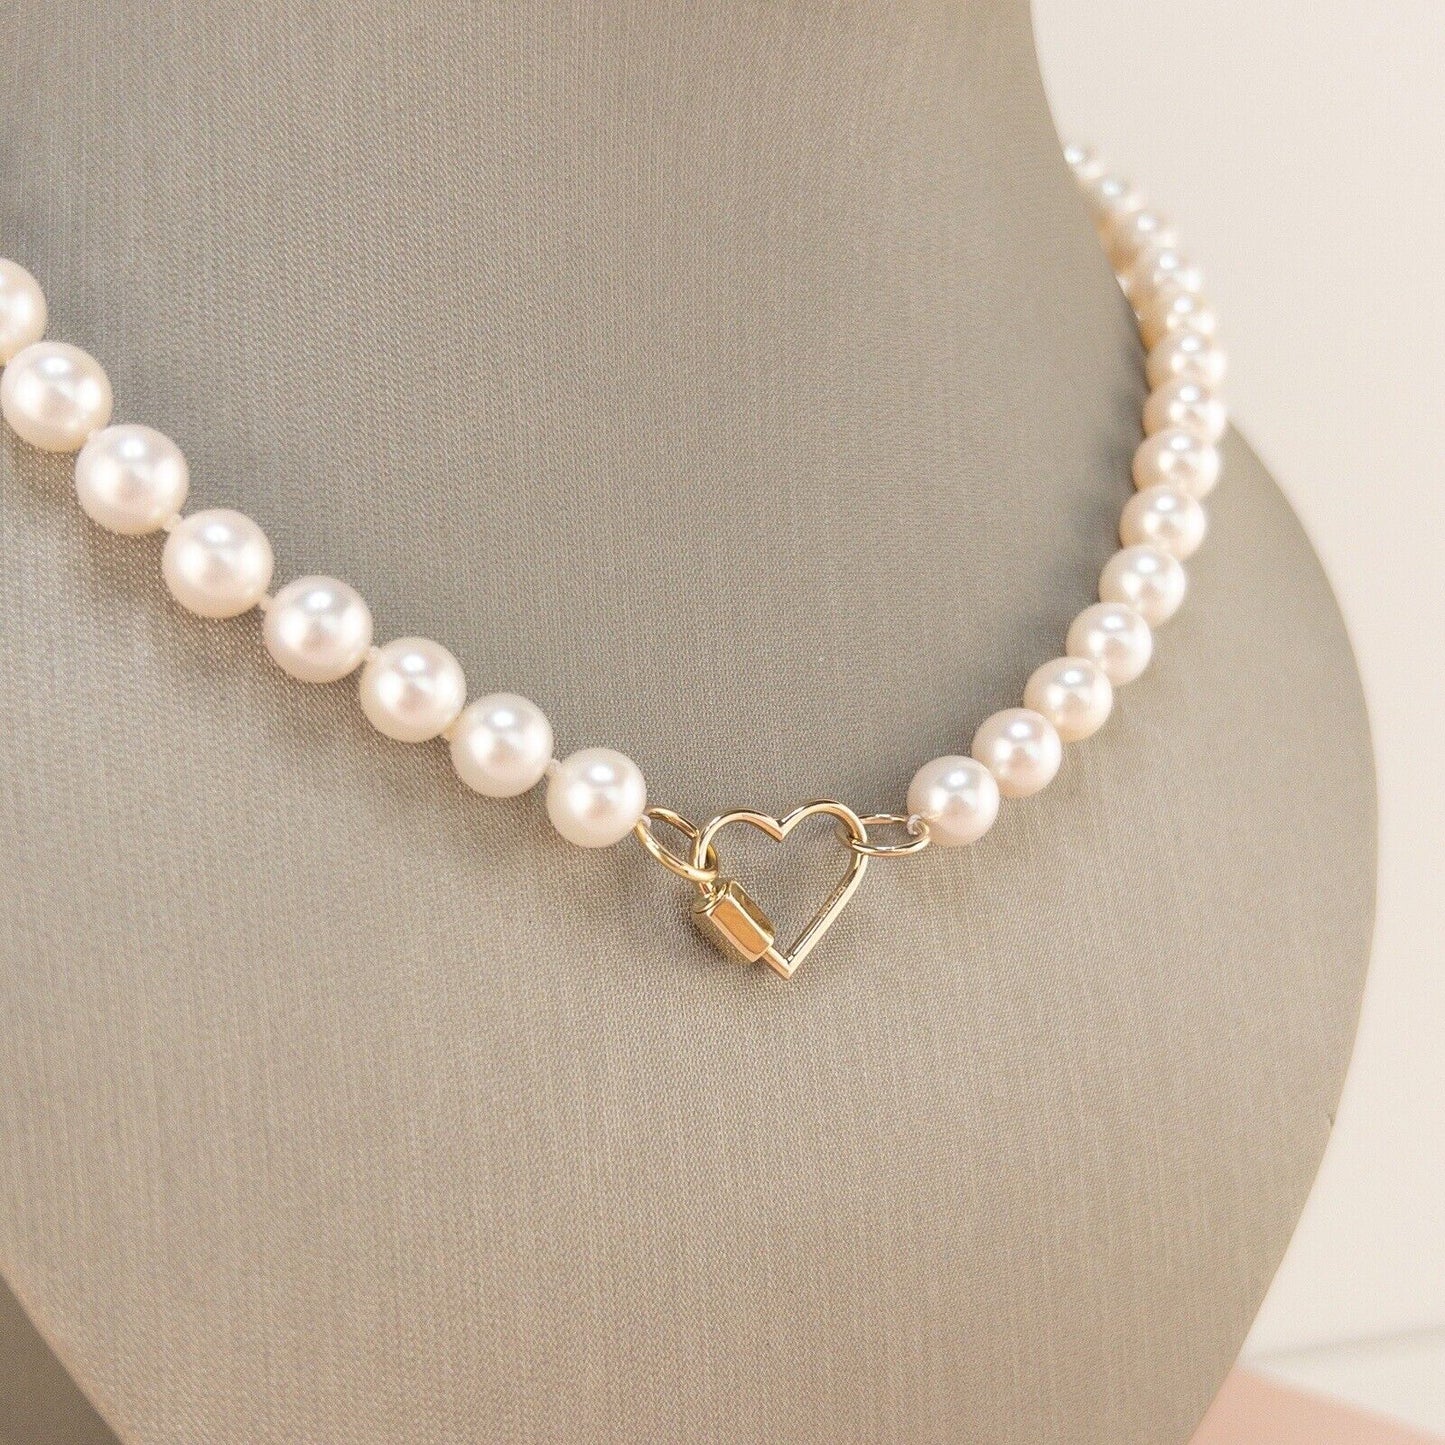 Genuine 7.5-8mm Cultured Pearl Solid 14k Yellow Gold Heart Necklace, New 16.5”